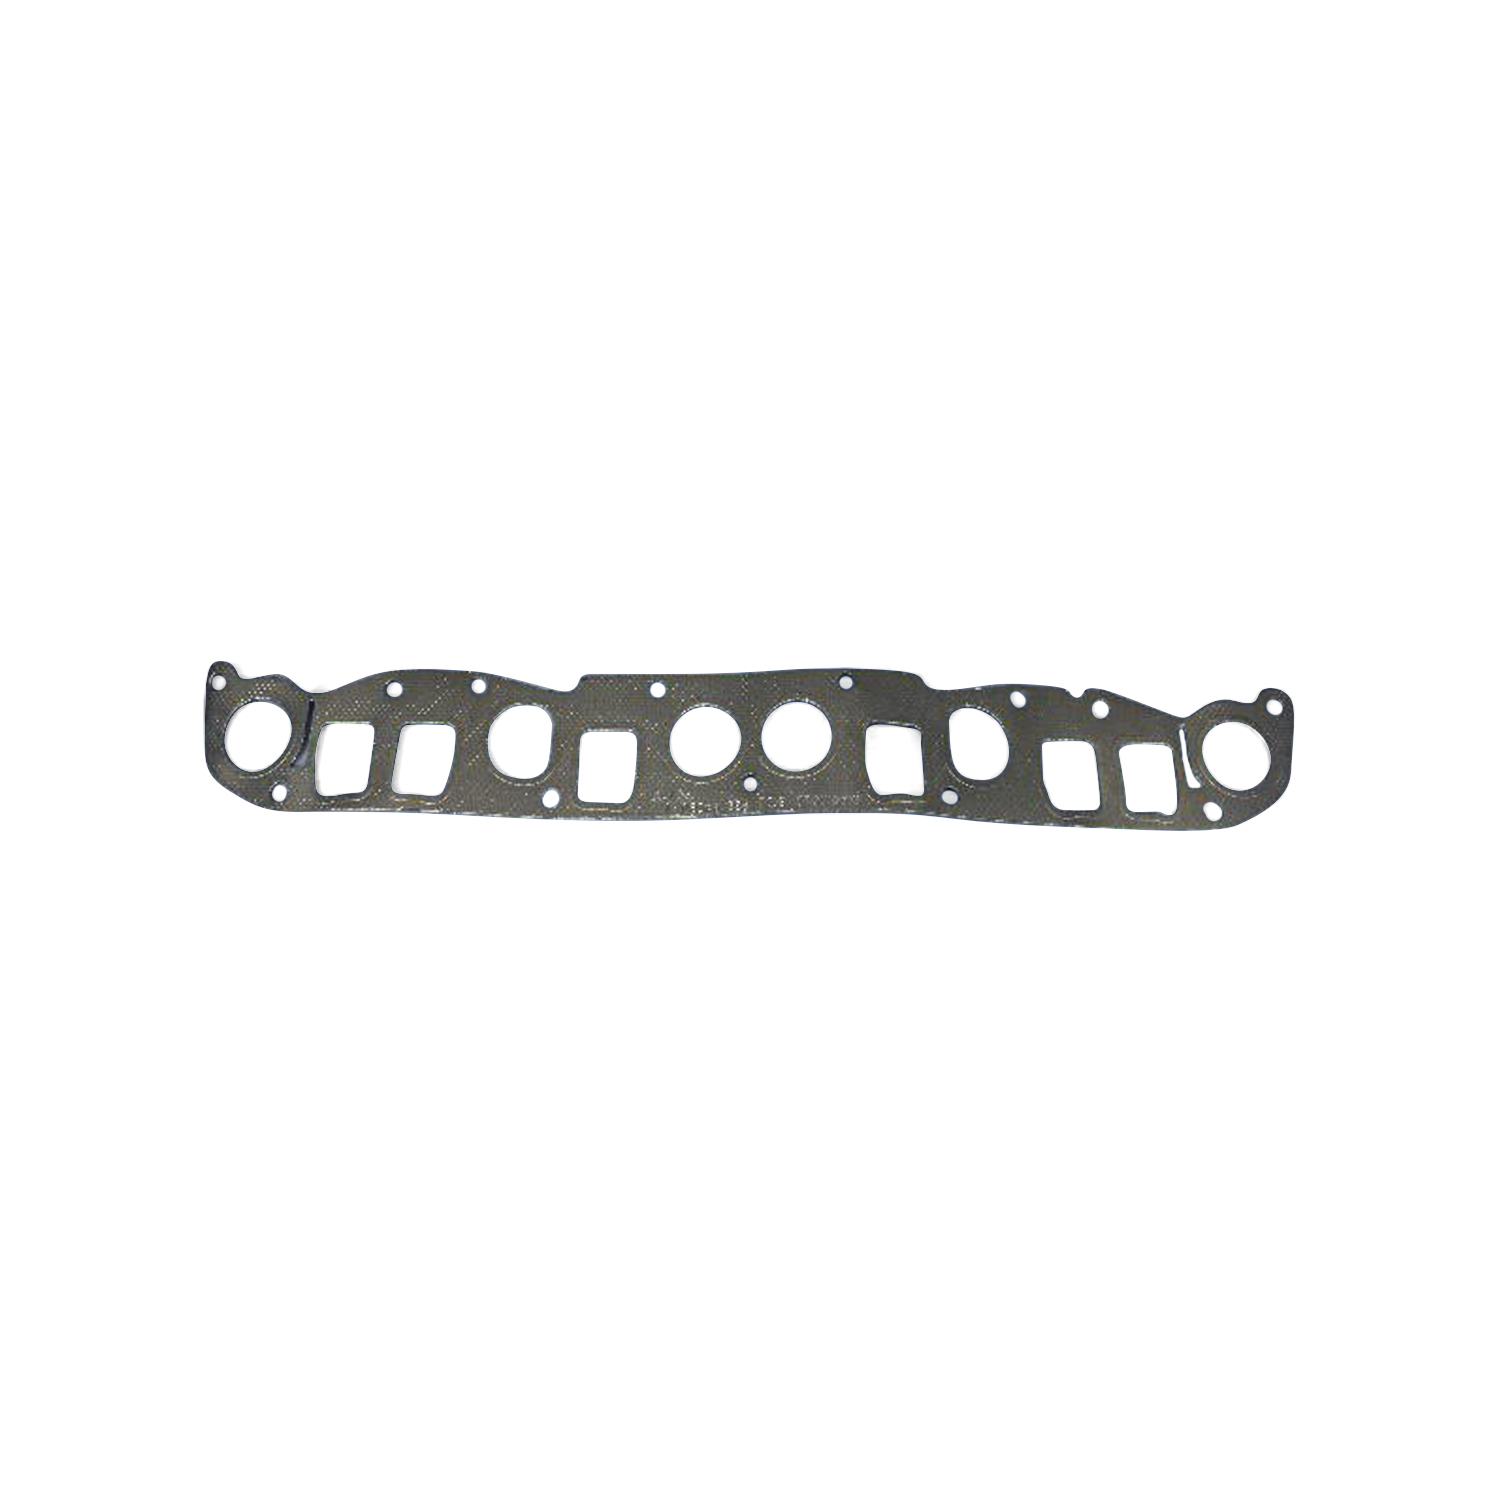 MOPAR BRAND - Intake And Exhaust Manifolds Combination Gasket - MPB 53010238